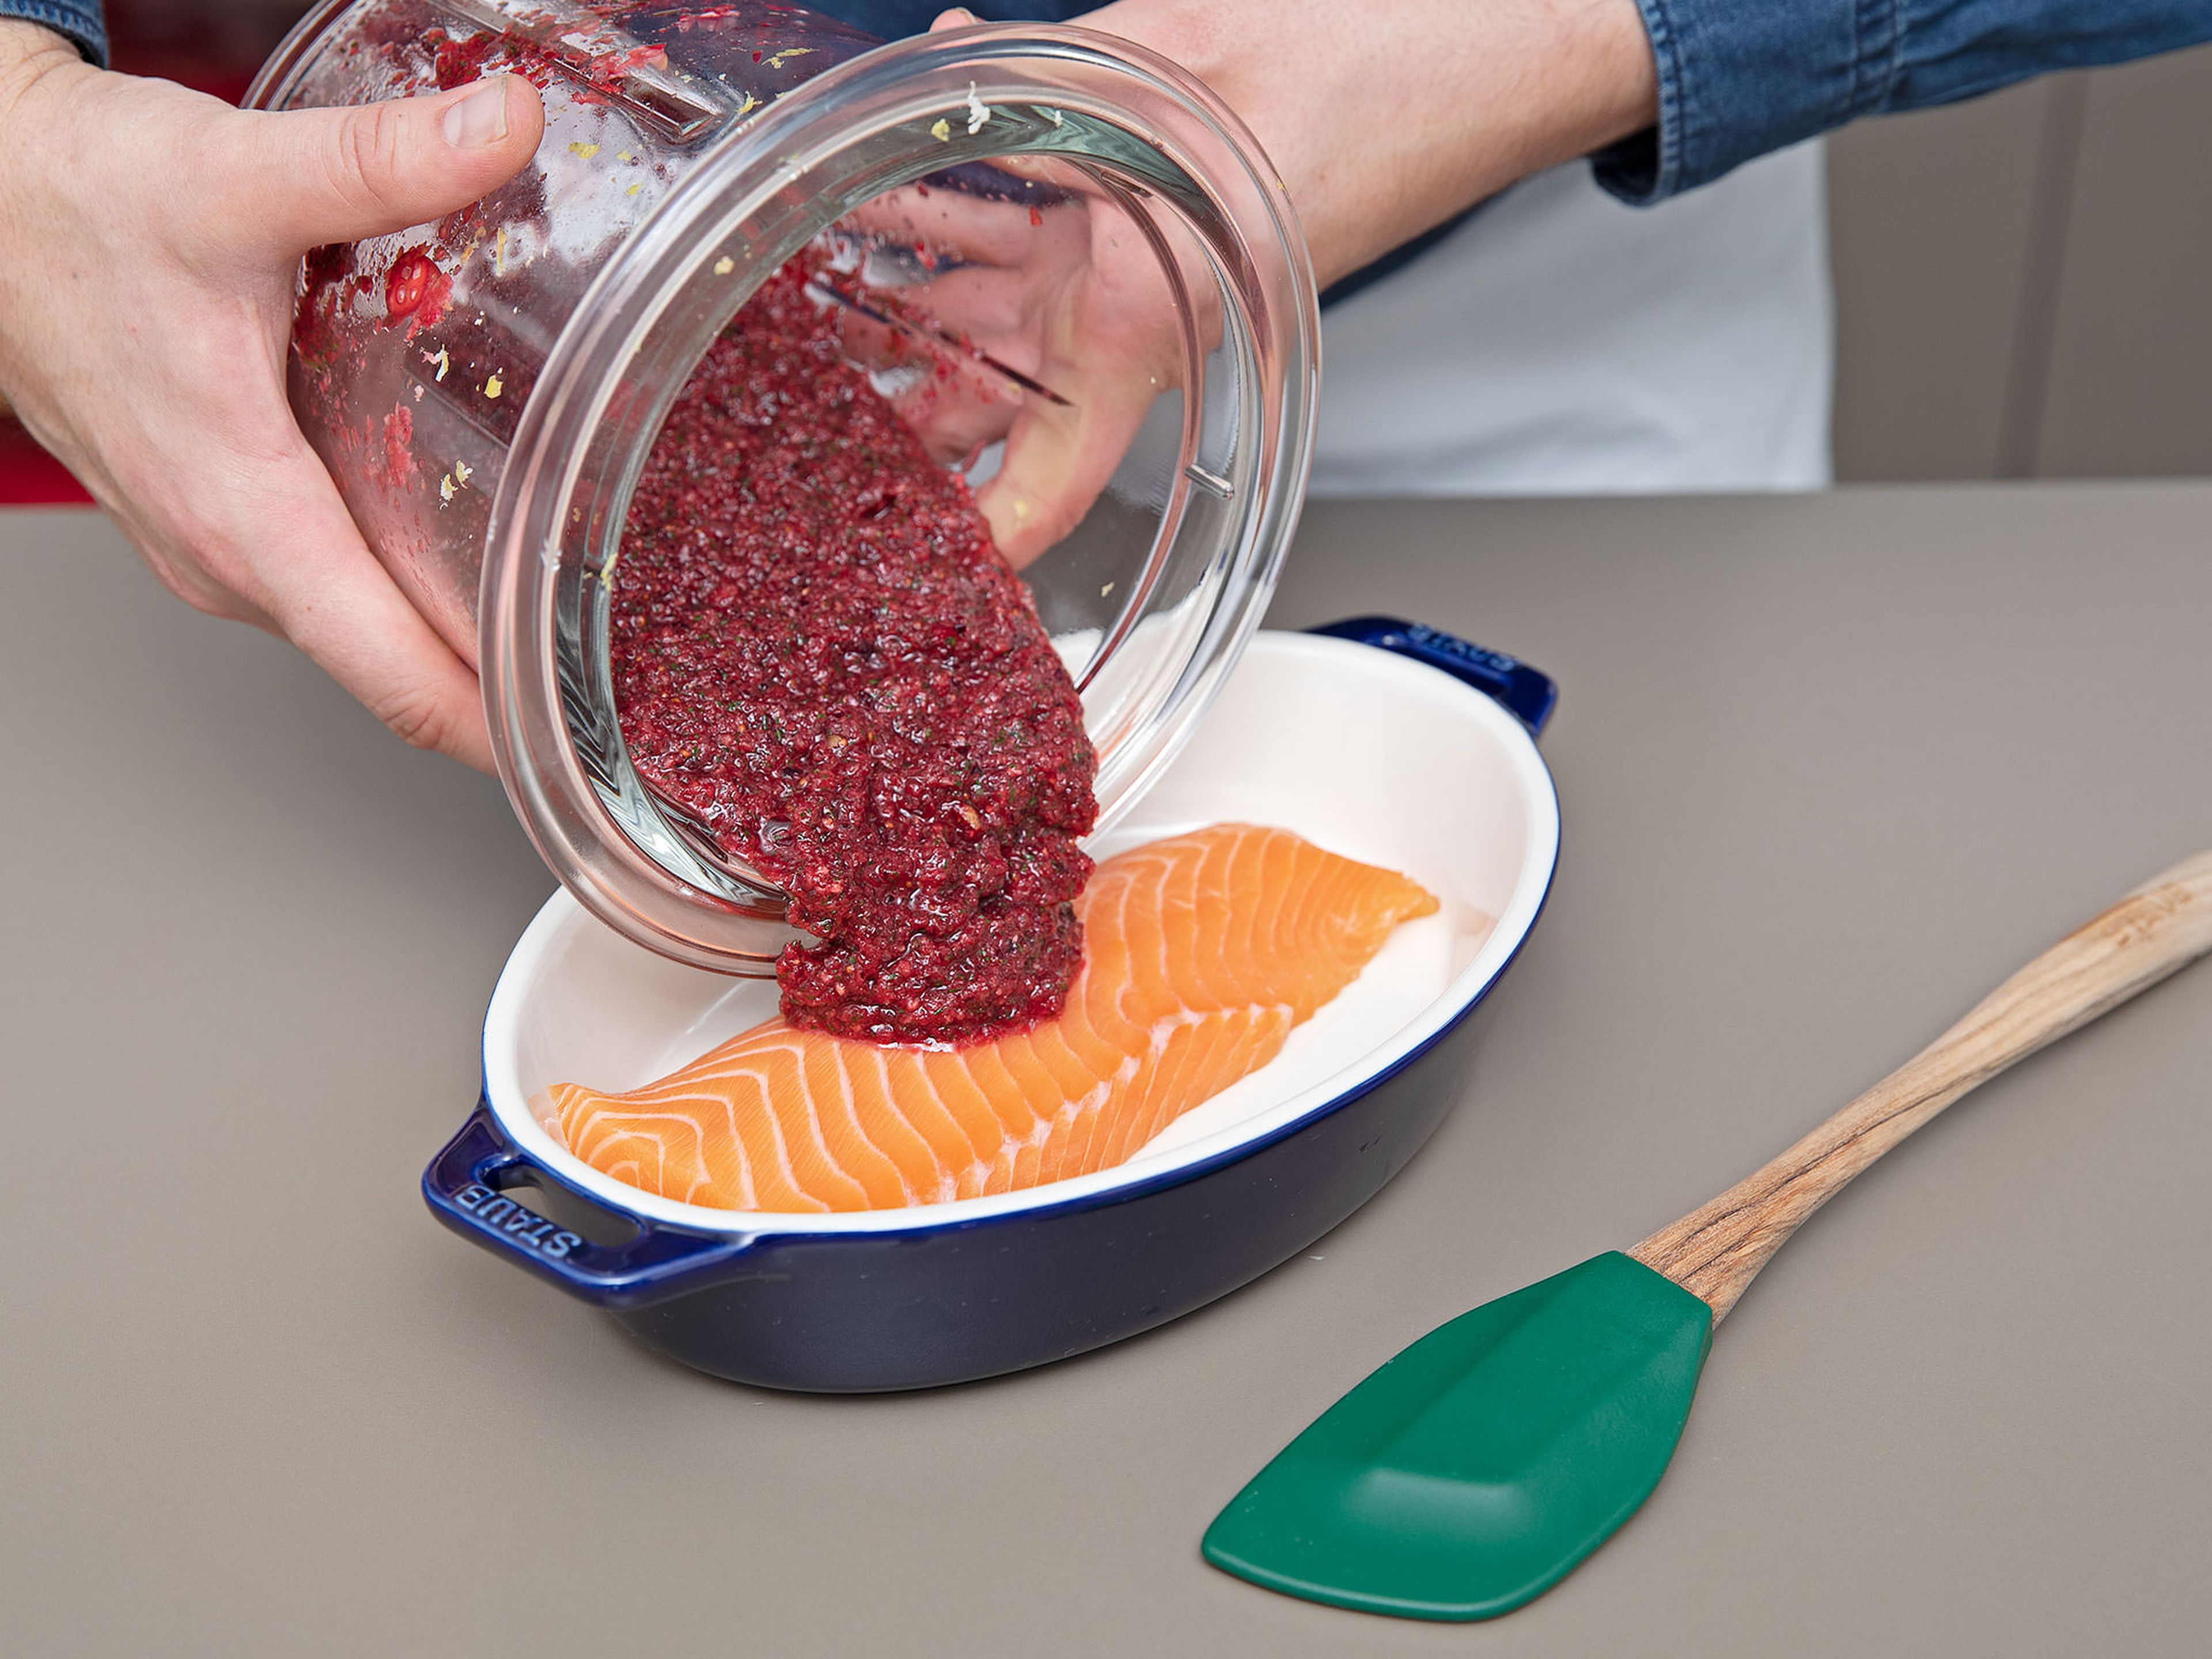 Add half of the cranberry paste to the bottom of a ceramic dish. Place the salmon on top and cover the top and the sides of the salmon with the rest of the paste until the paste is used up and the salmon is completey concealed.